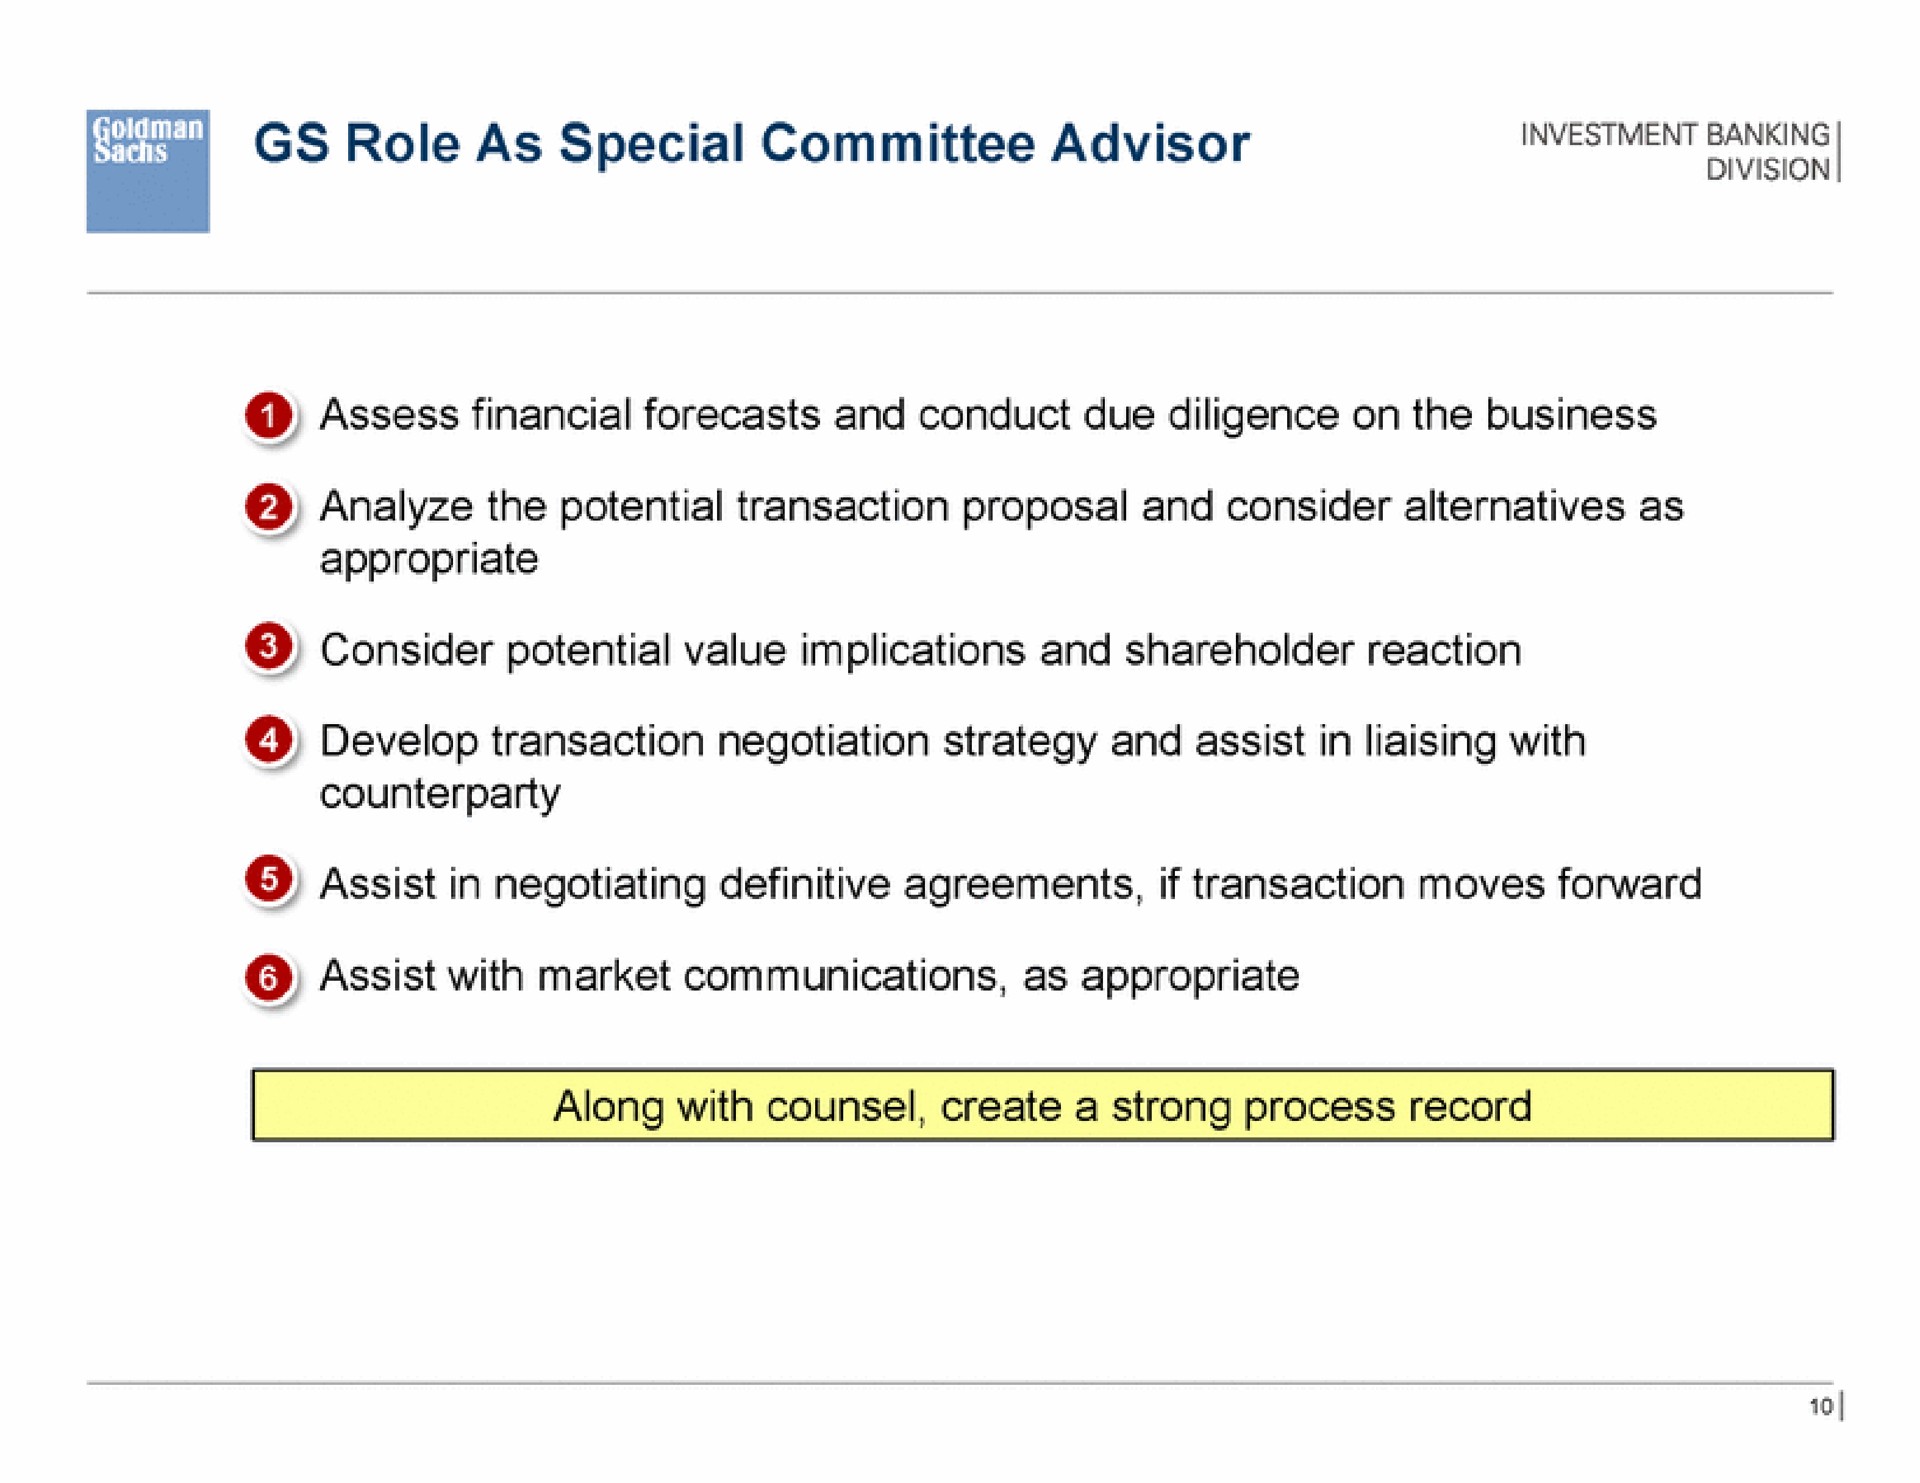 role as special committee advisor investment banking | Goldman Sachs